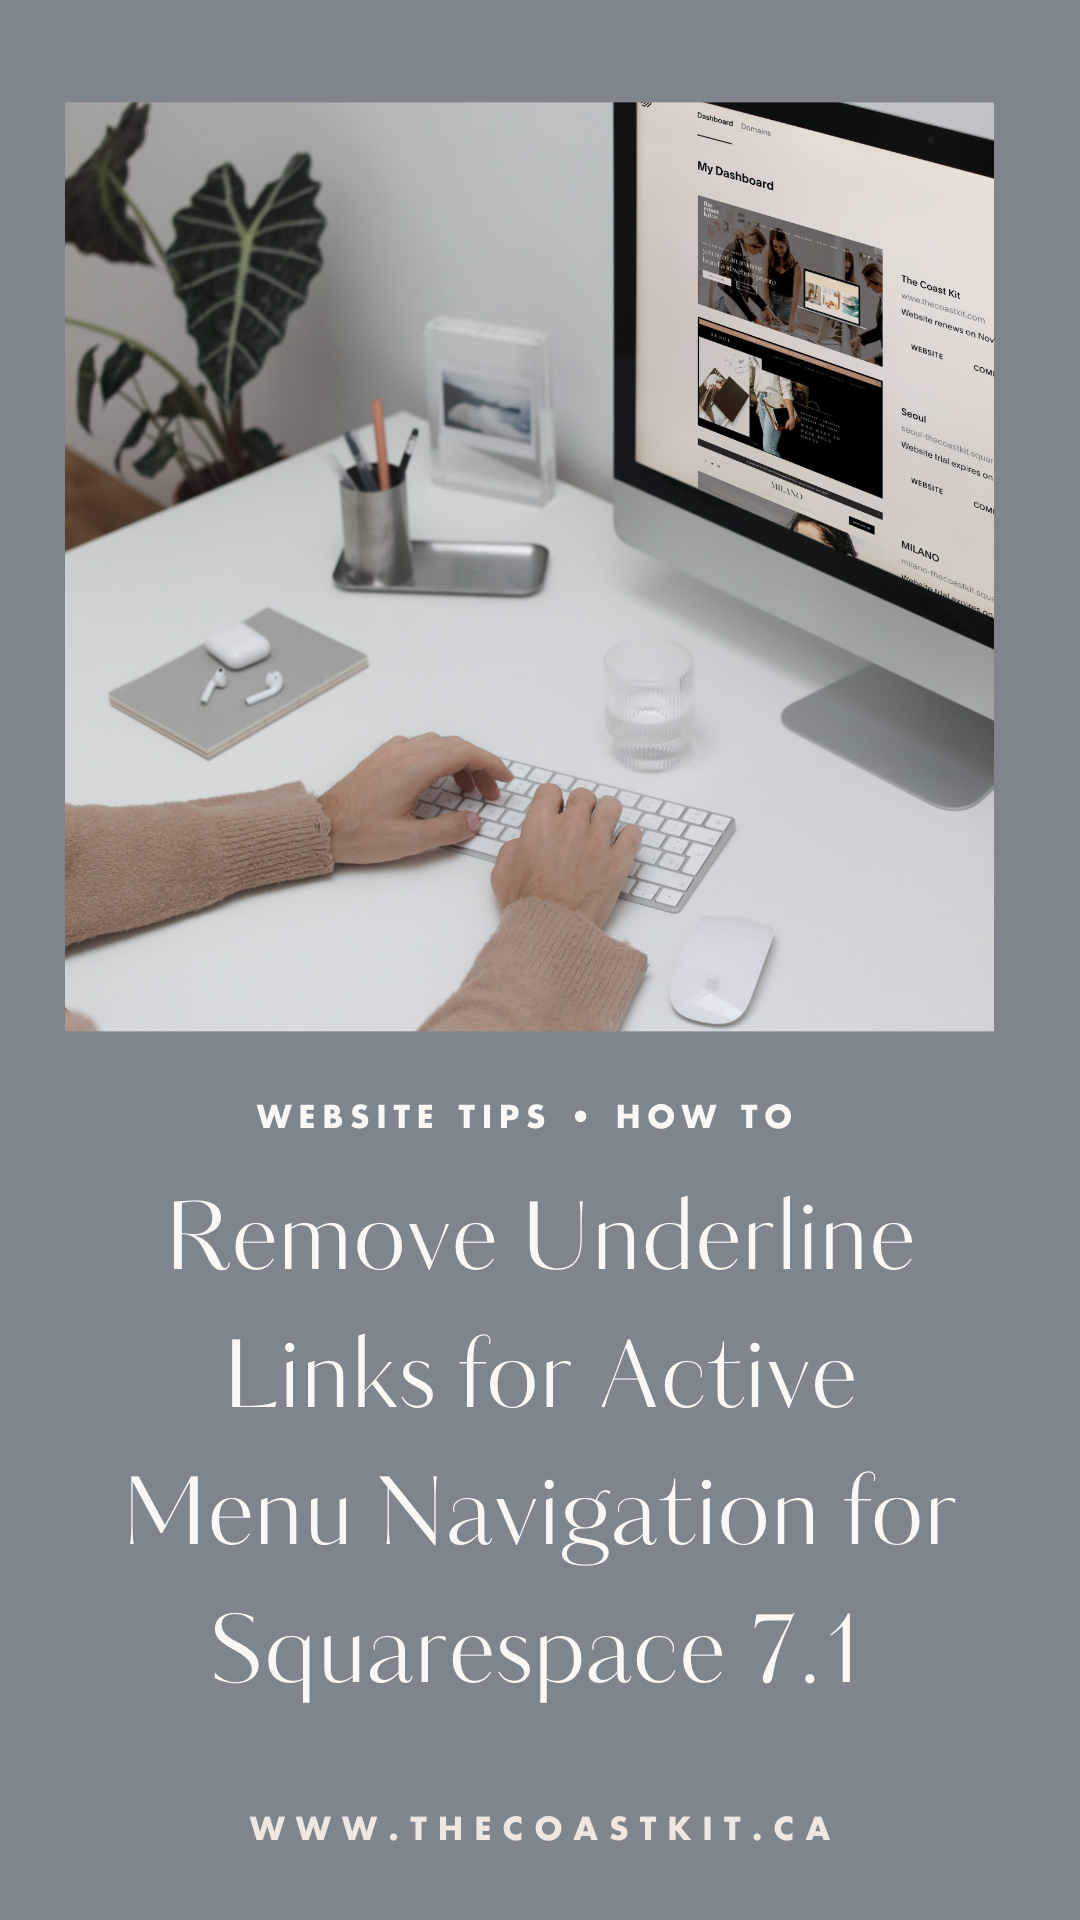 how-to-remove-underline-links-menu-squarespace-7-1-3.png